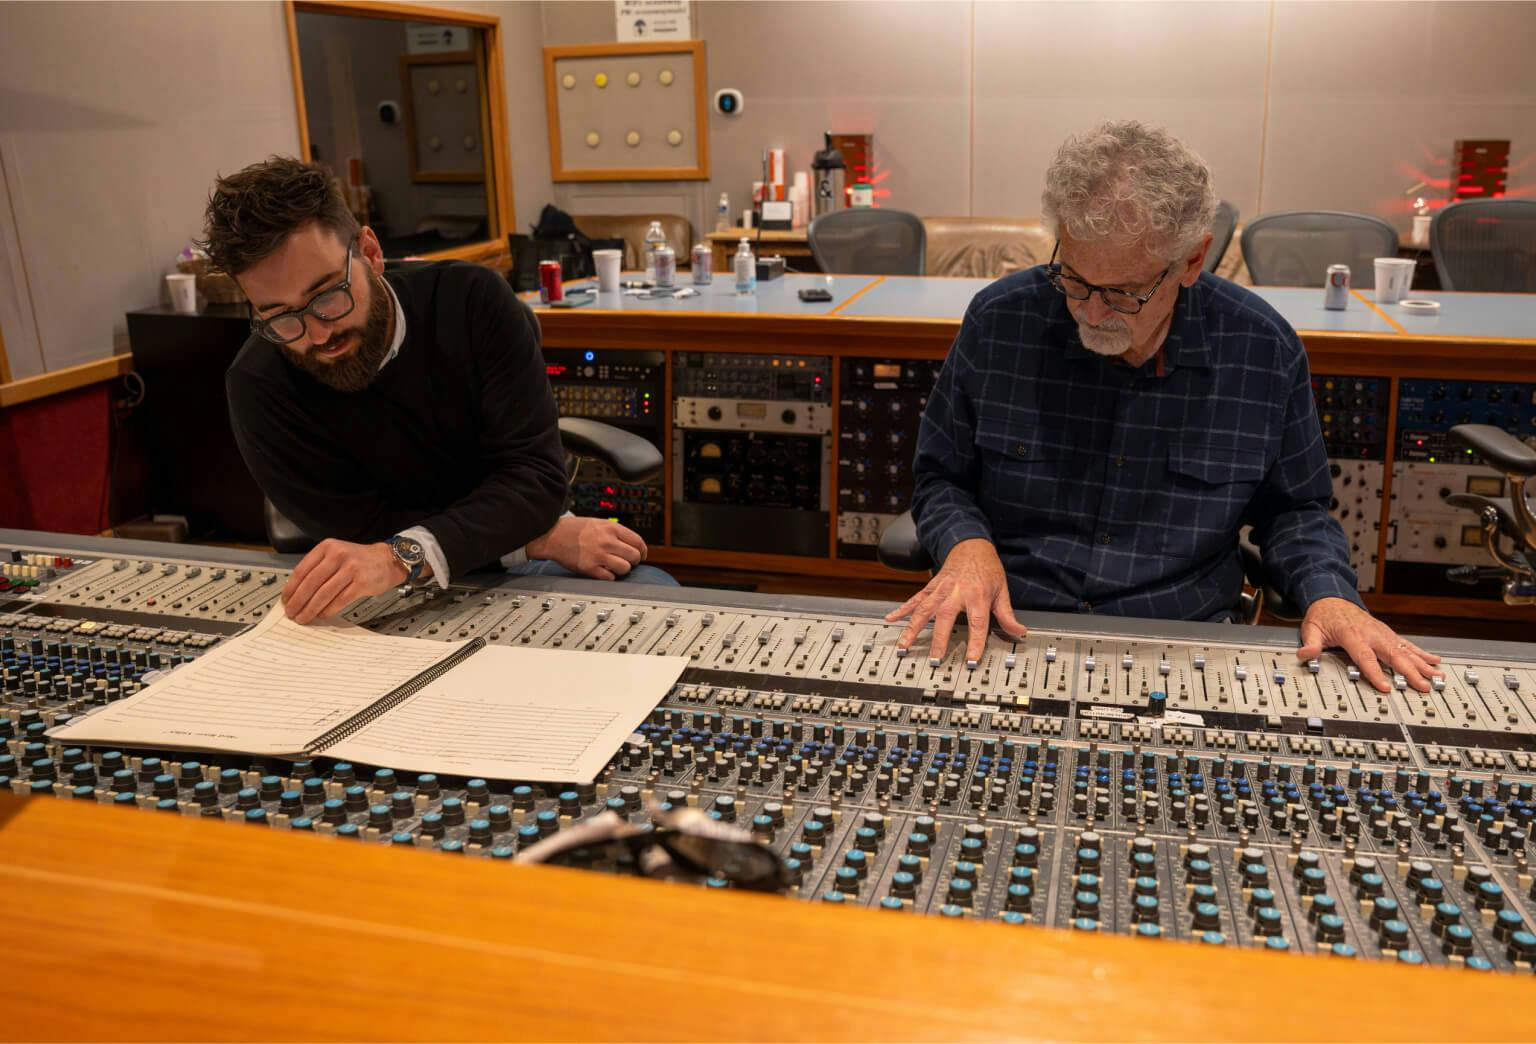 Oliver and his father, Bill, running the soundboard during a recording session.